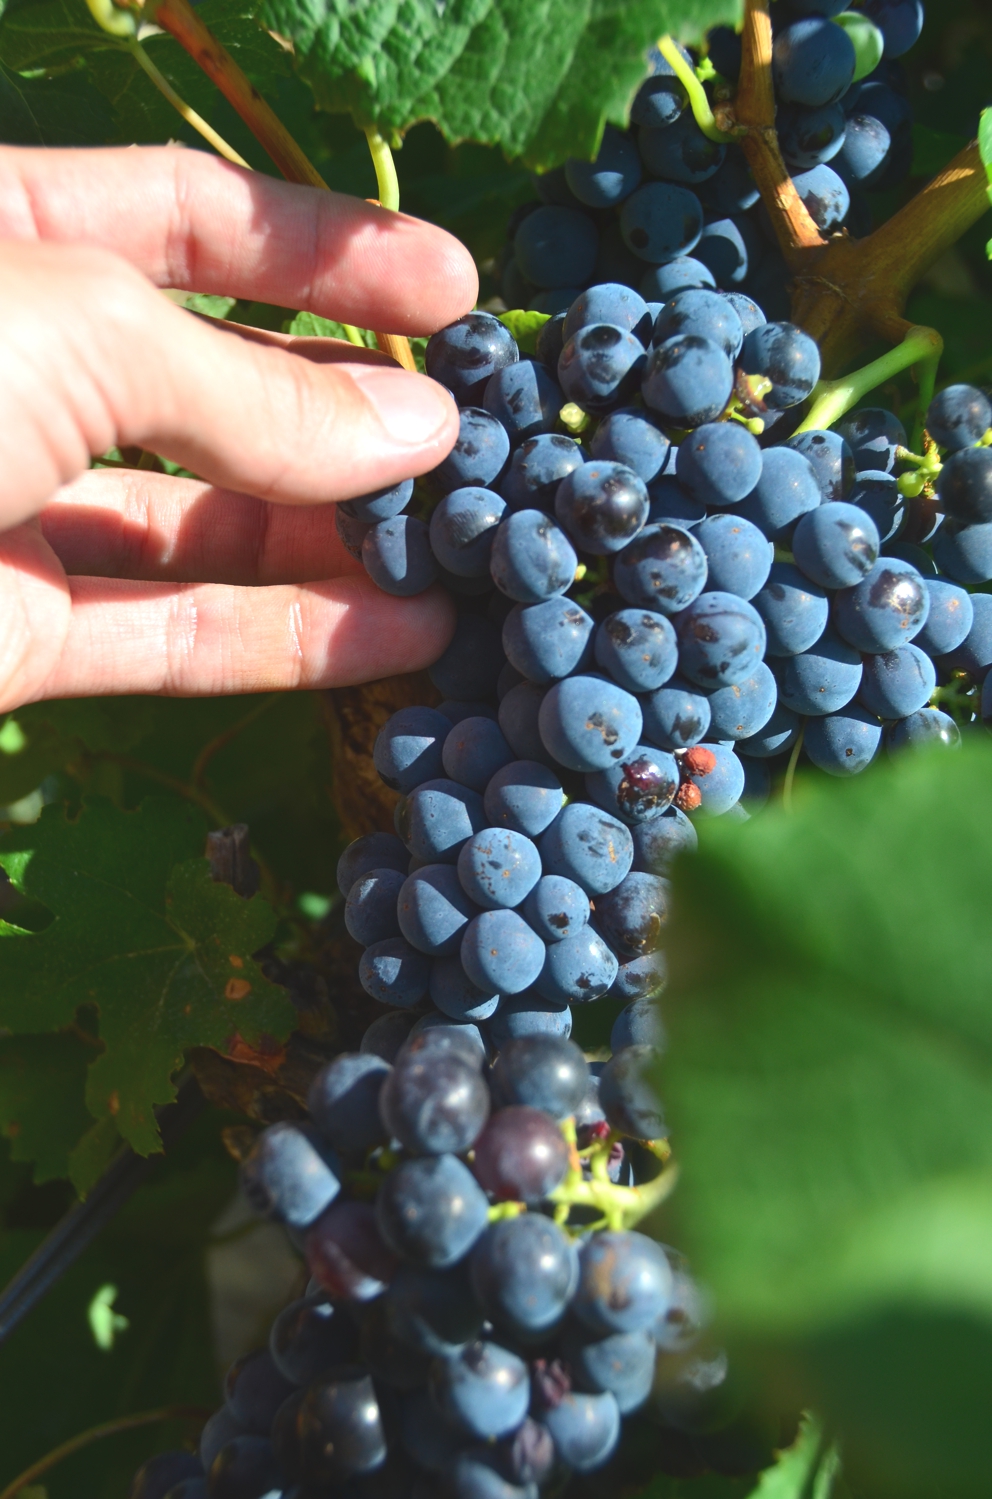 One of my favorite parts of any wine tour is roaming through vineyards – and eating grapes!